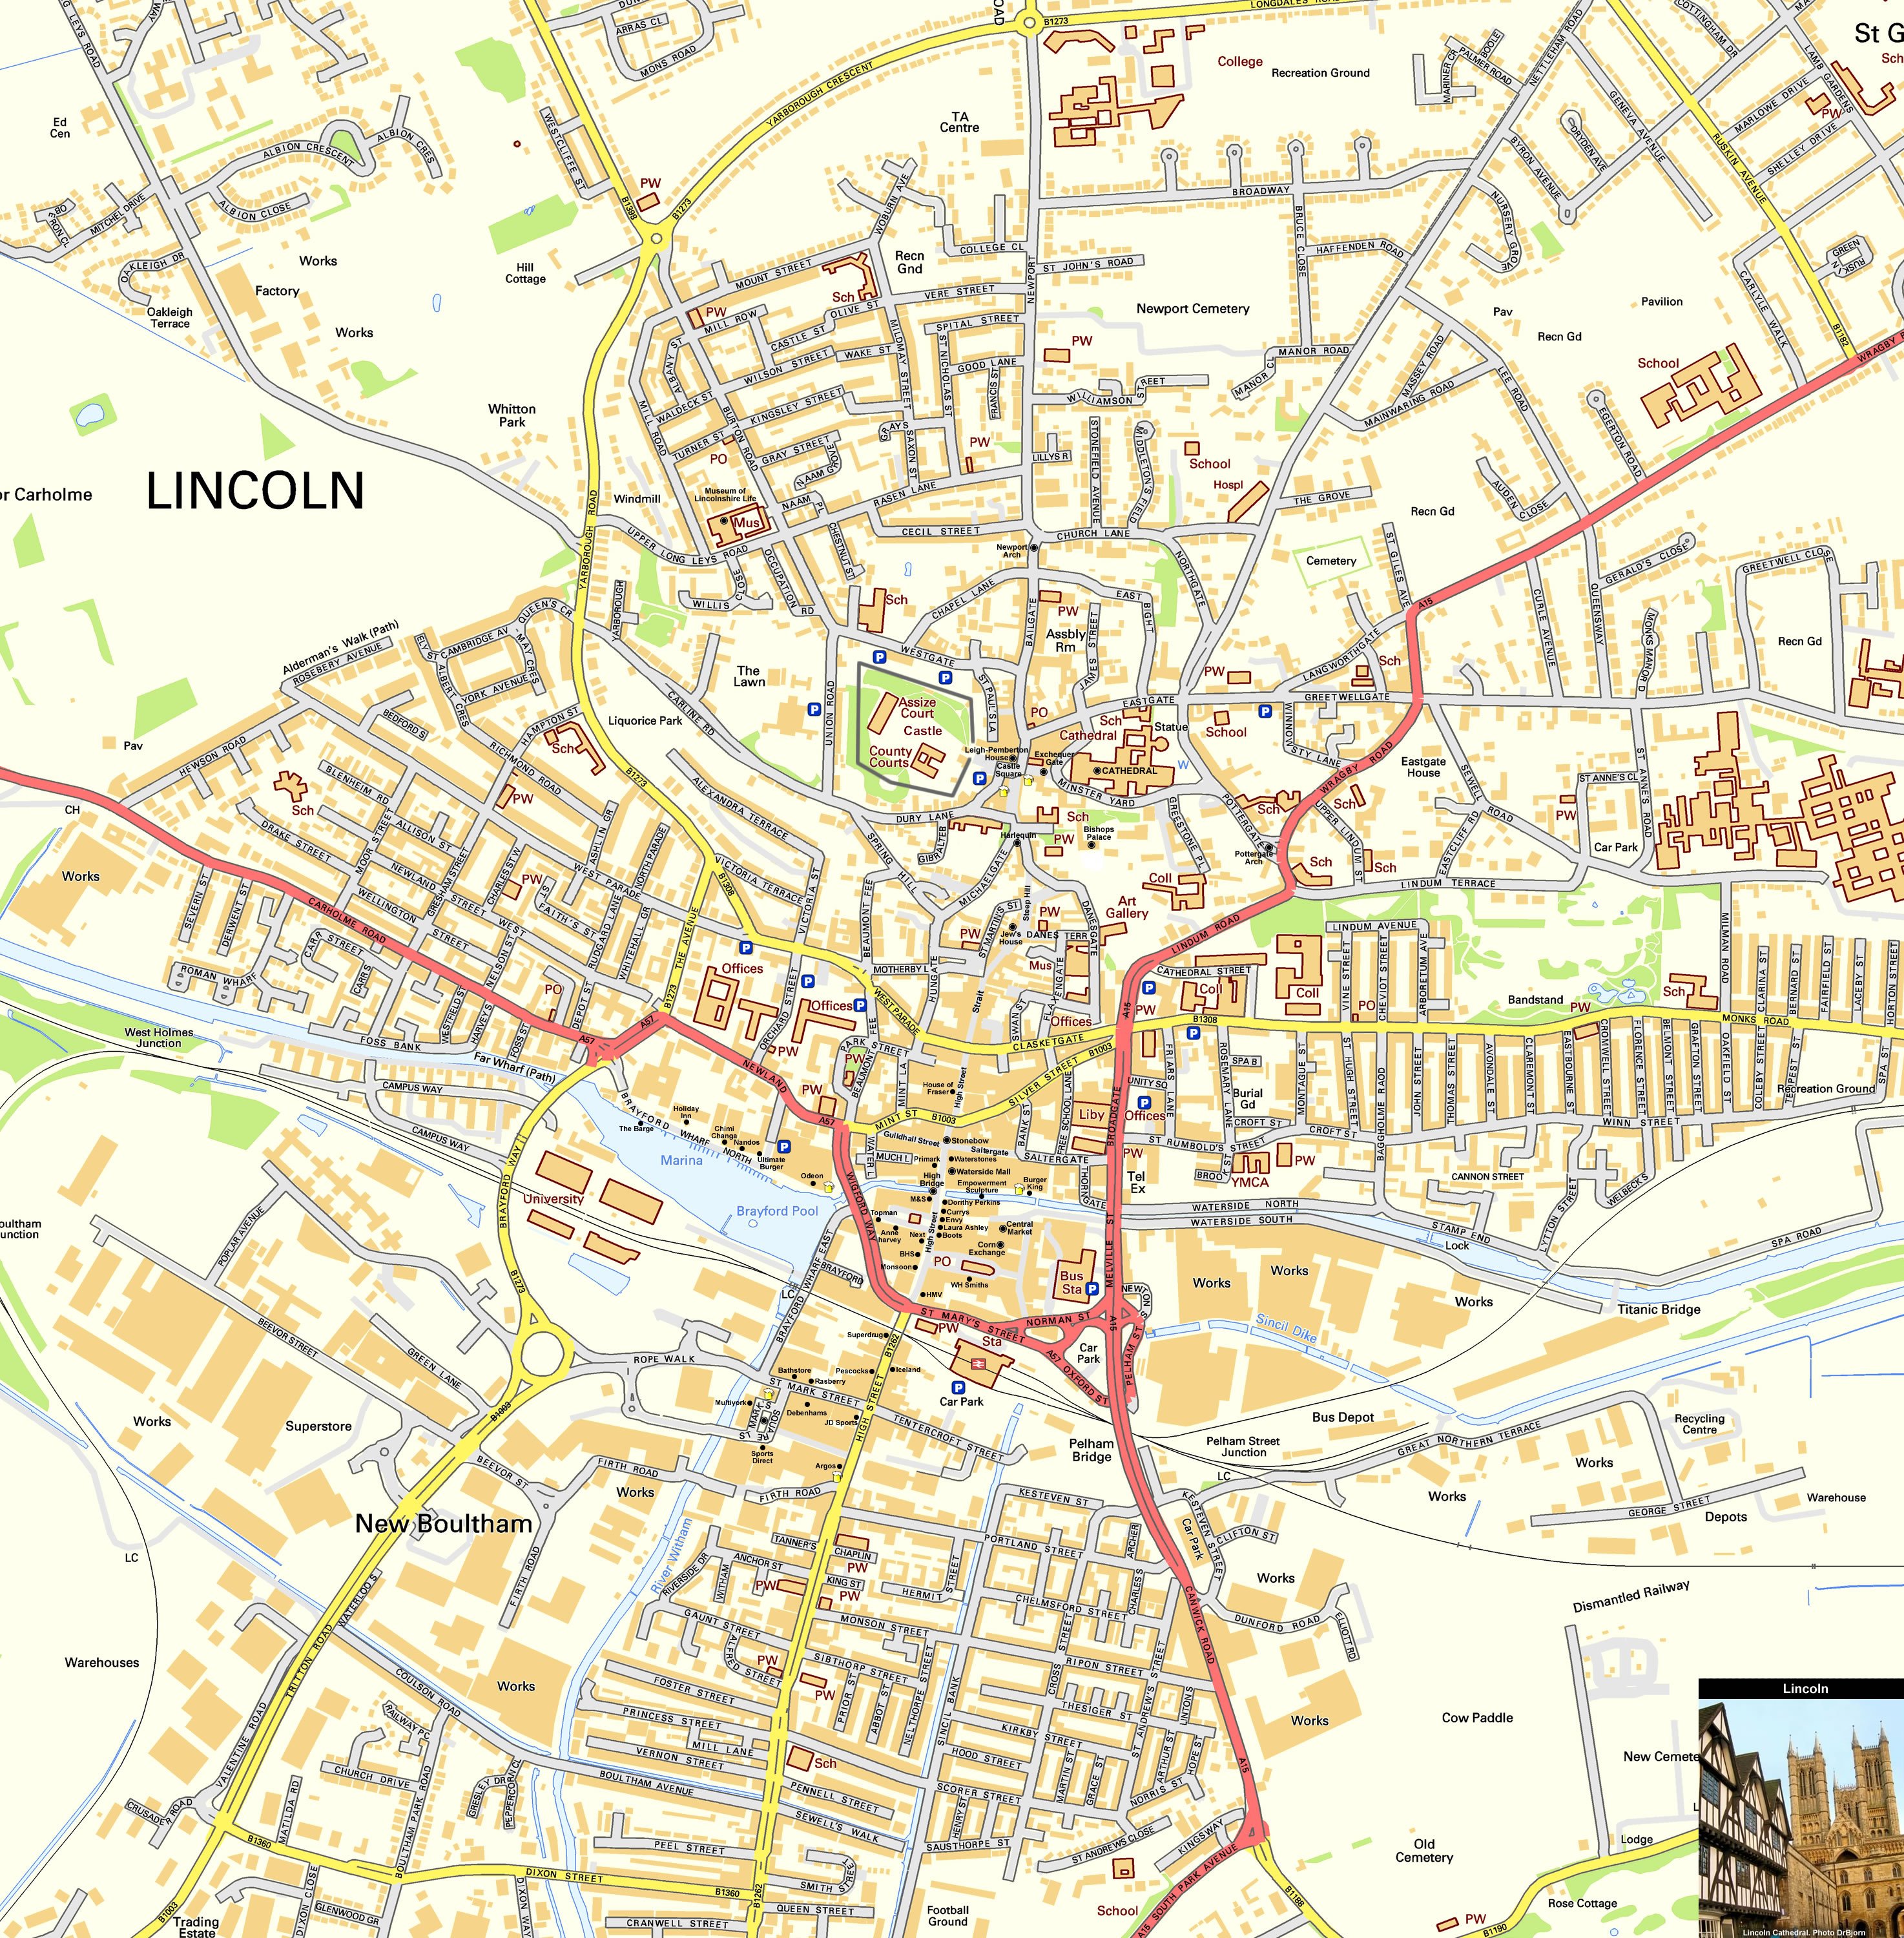 Detailed Map Of Lincoln - Bonnee Stoddard